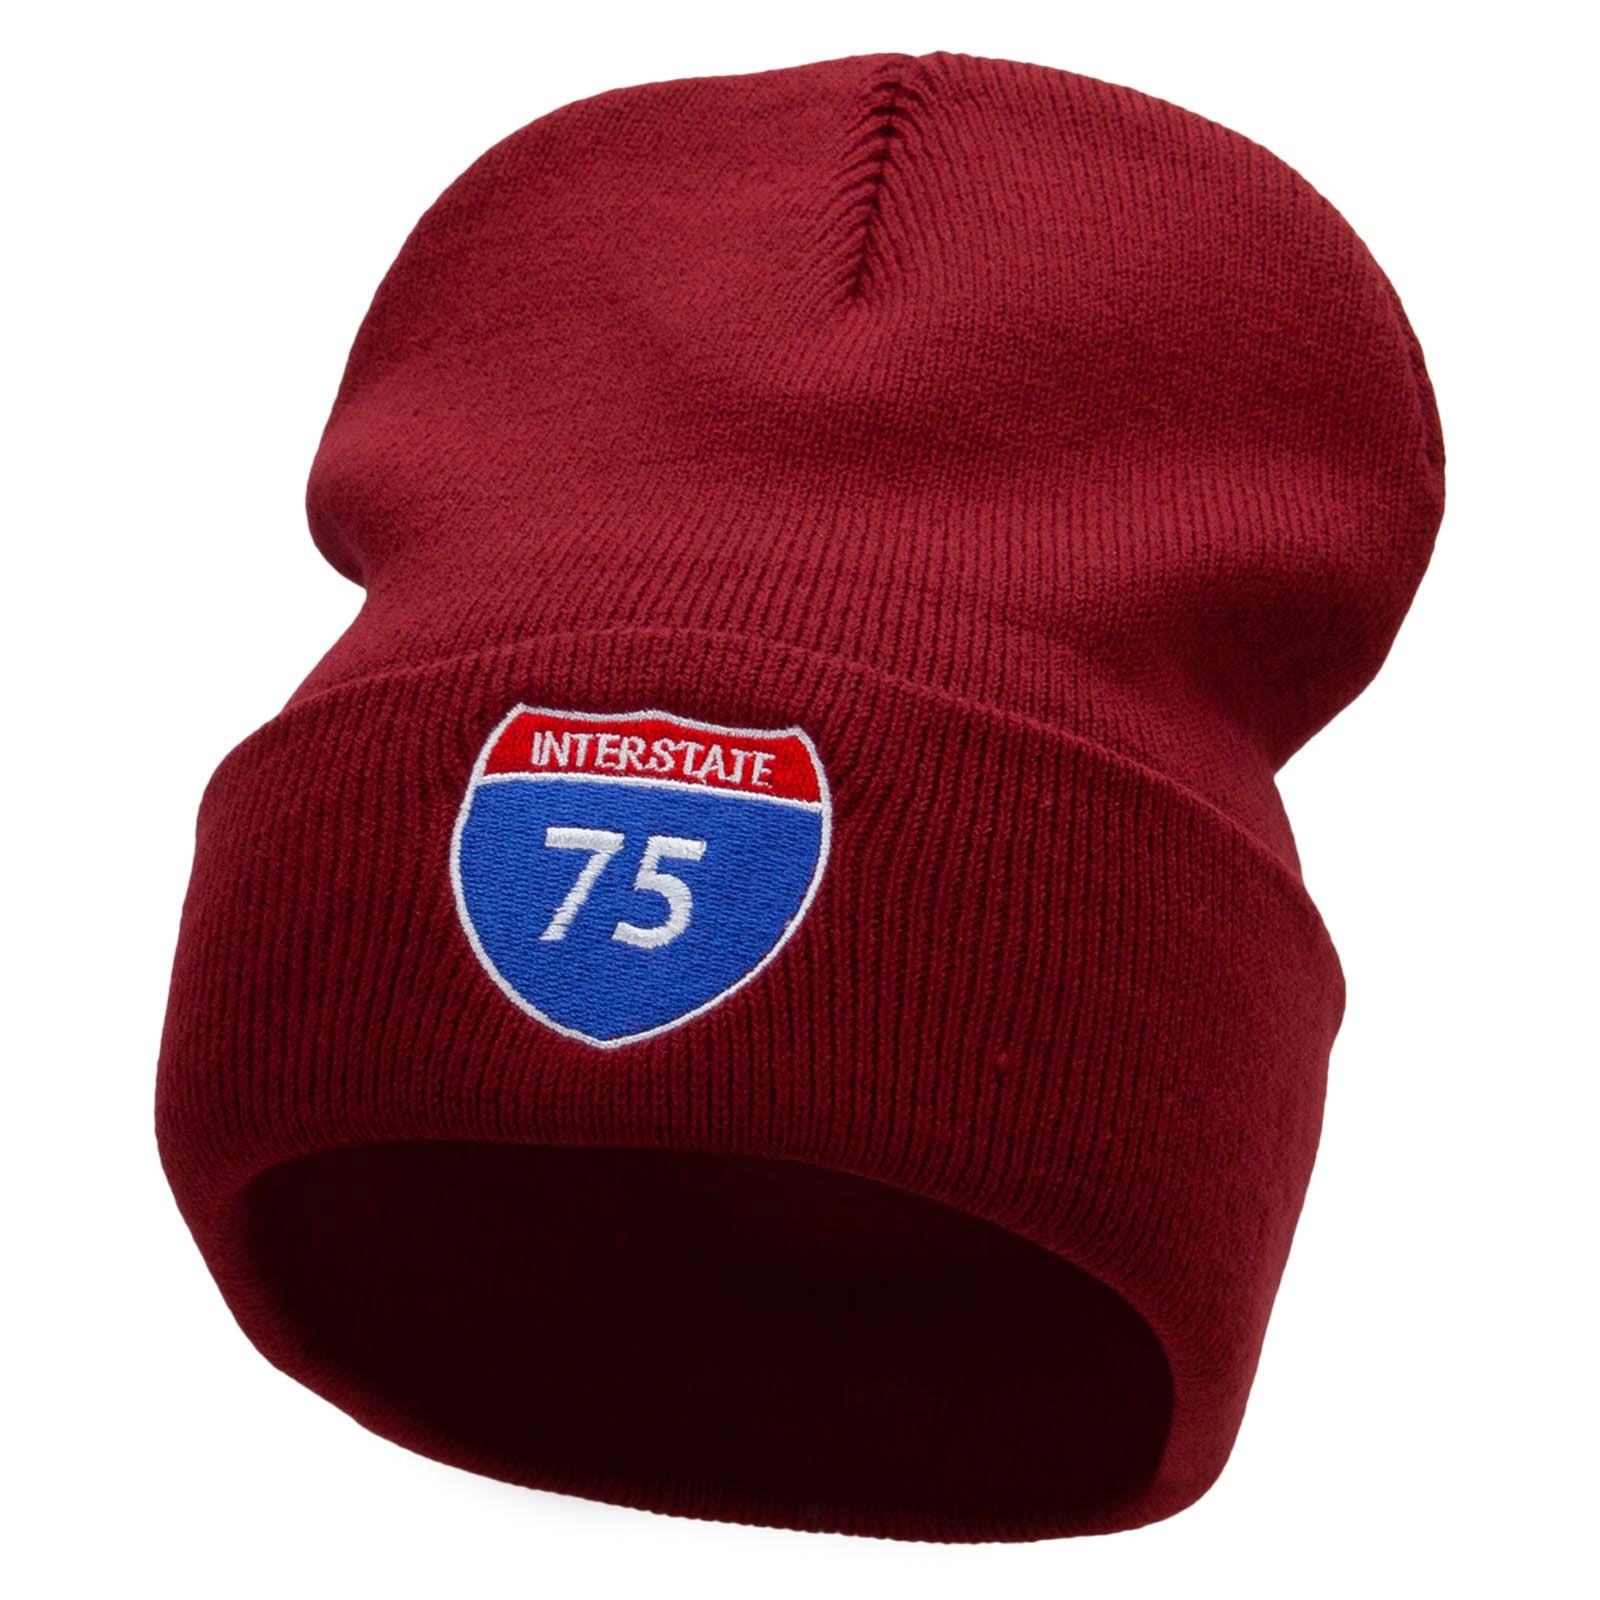 Interstate Highway 75 Sign Embroidered 12 Inch Long Knitted Beanie - Maroon OSFM